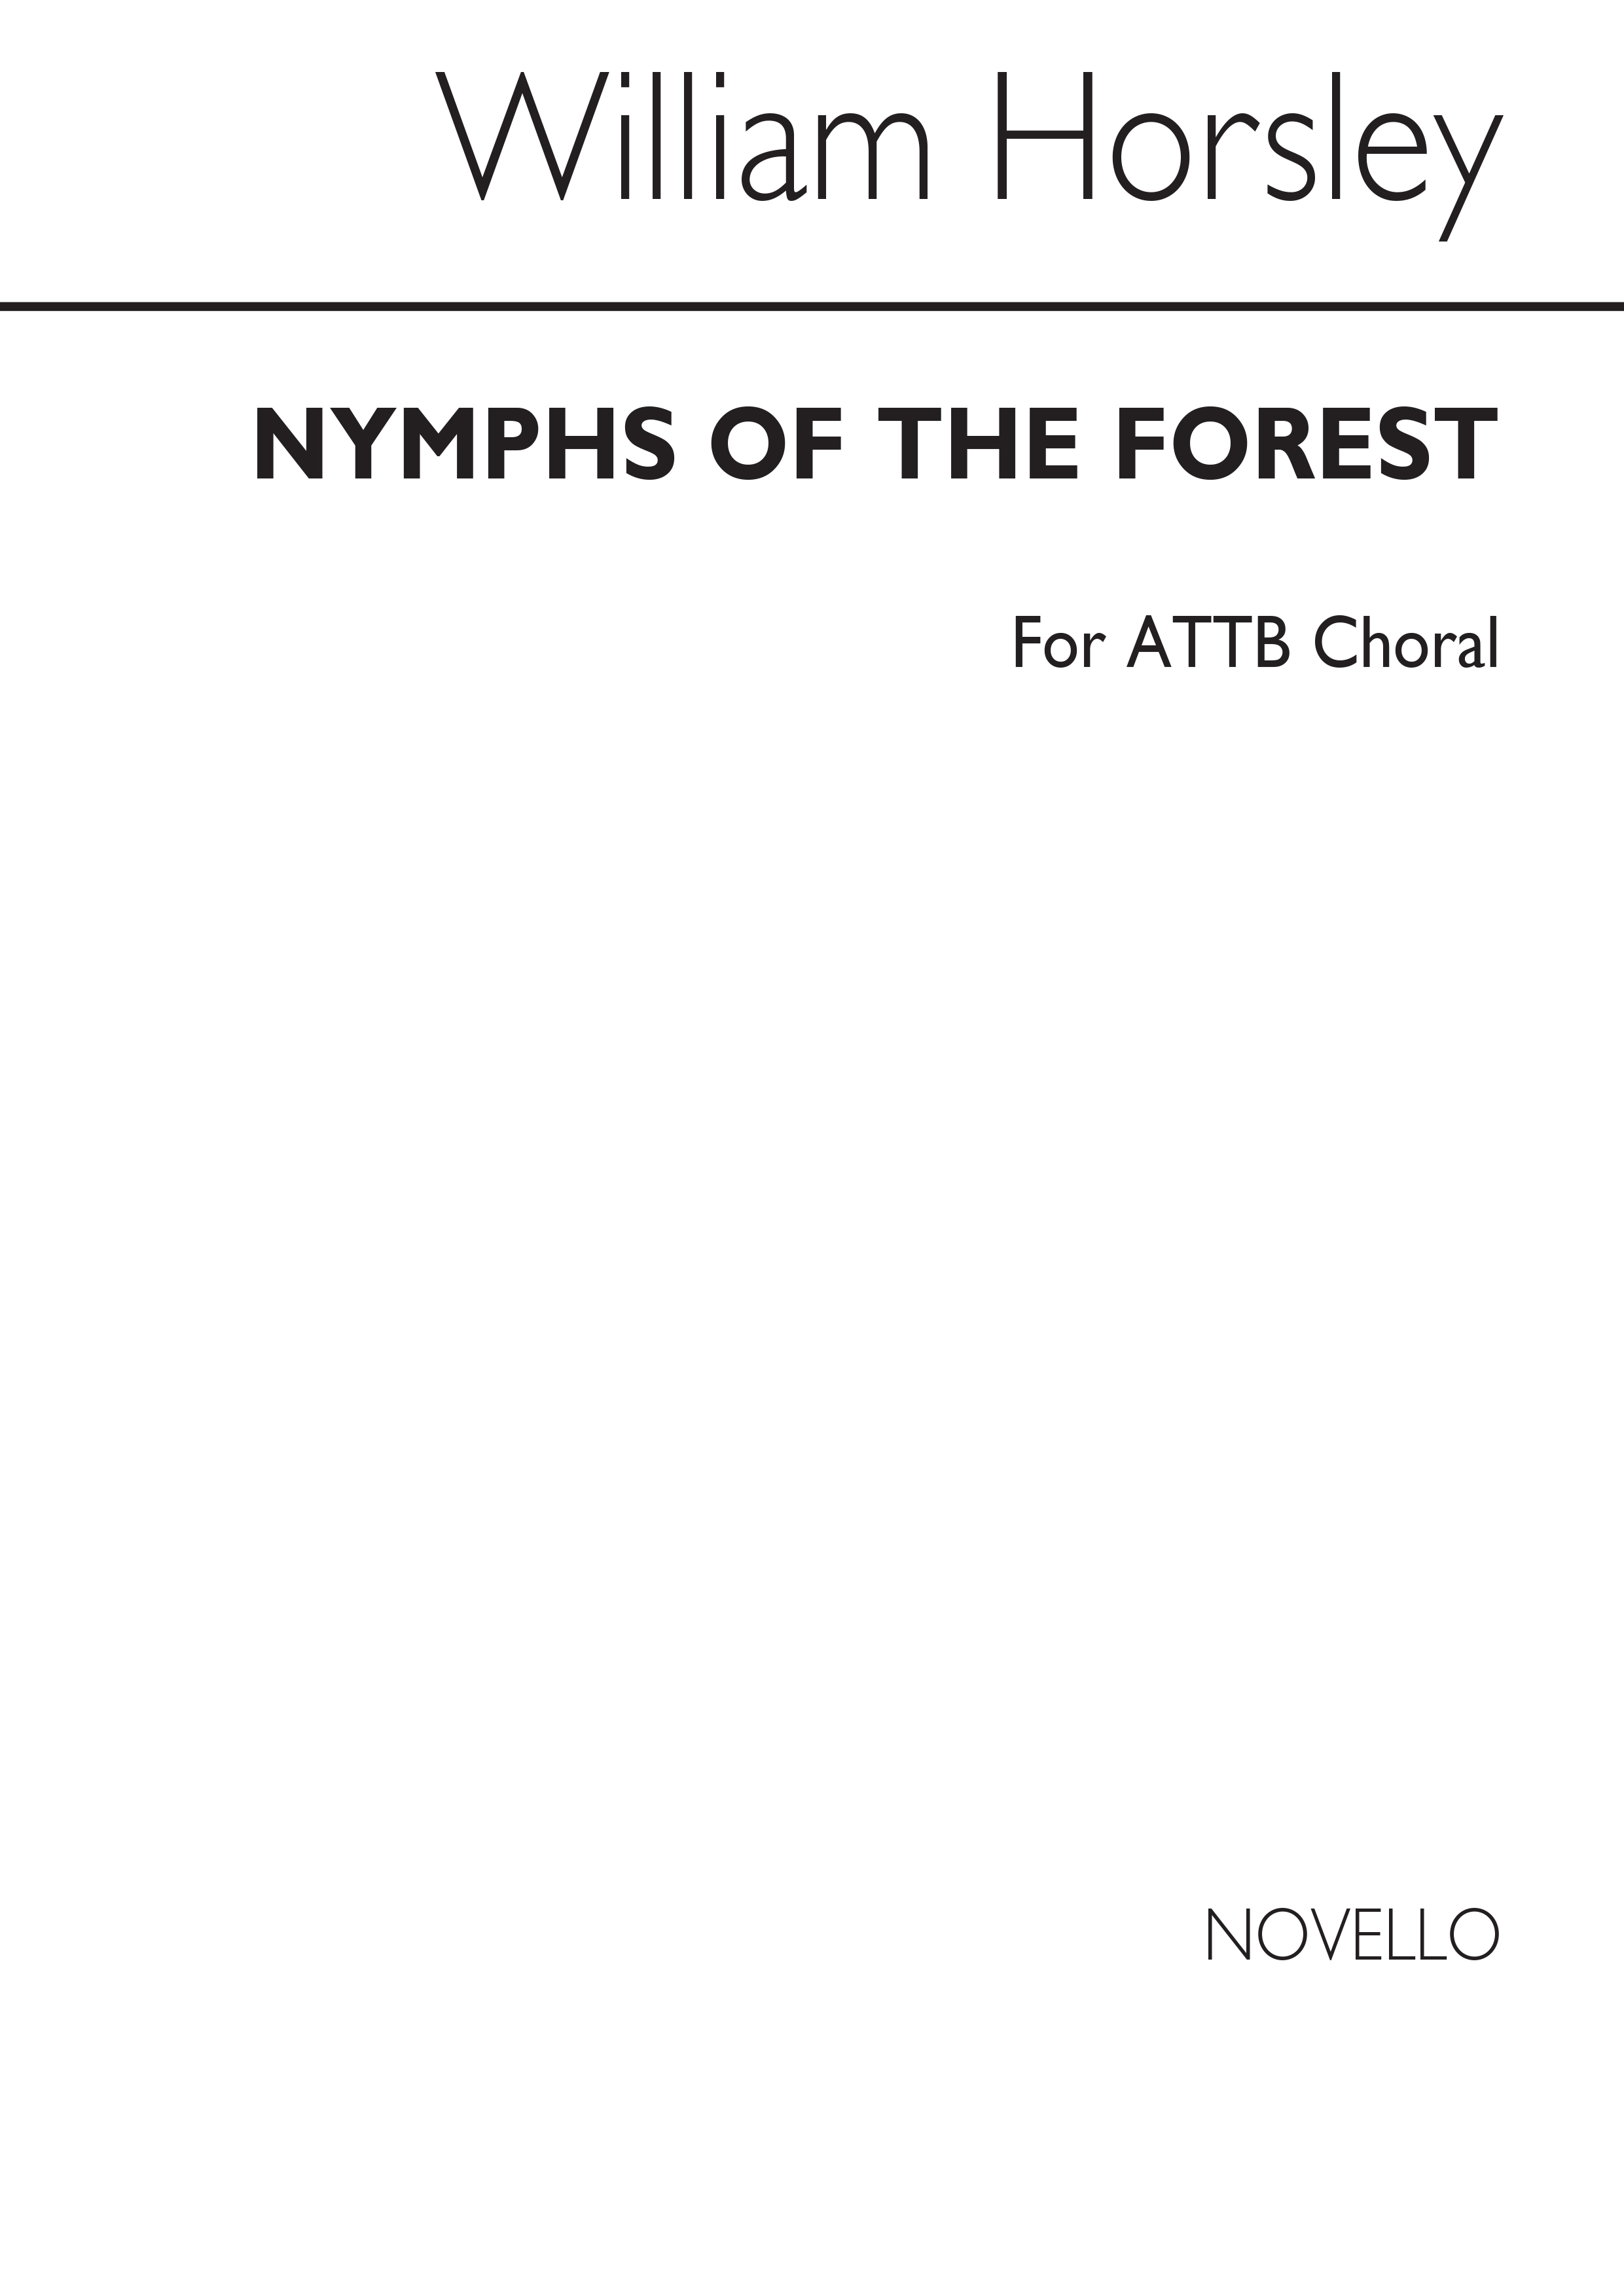 William Horsley: Nymphs Of The Forest